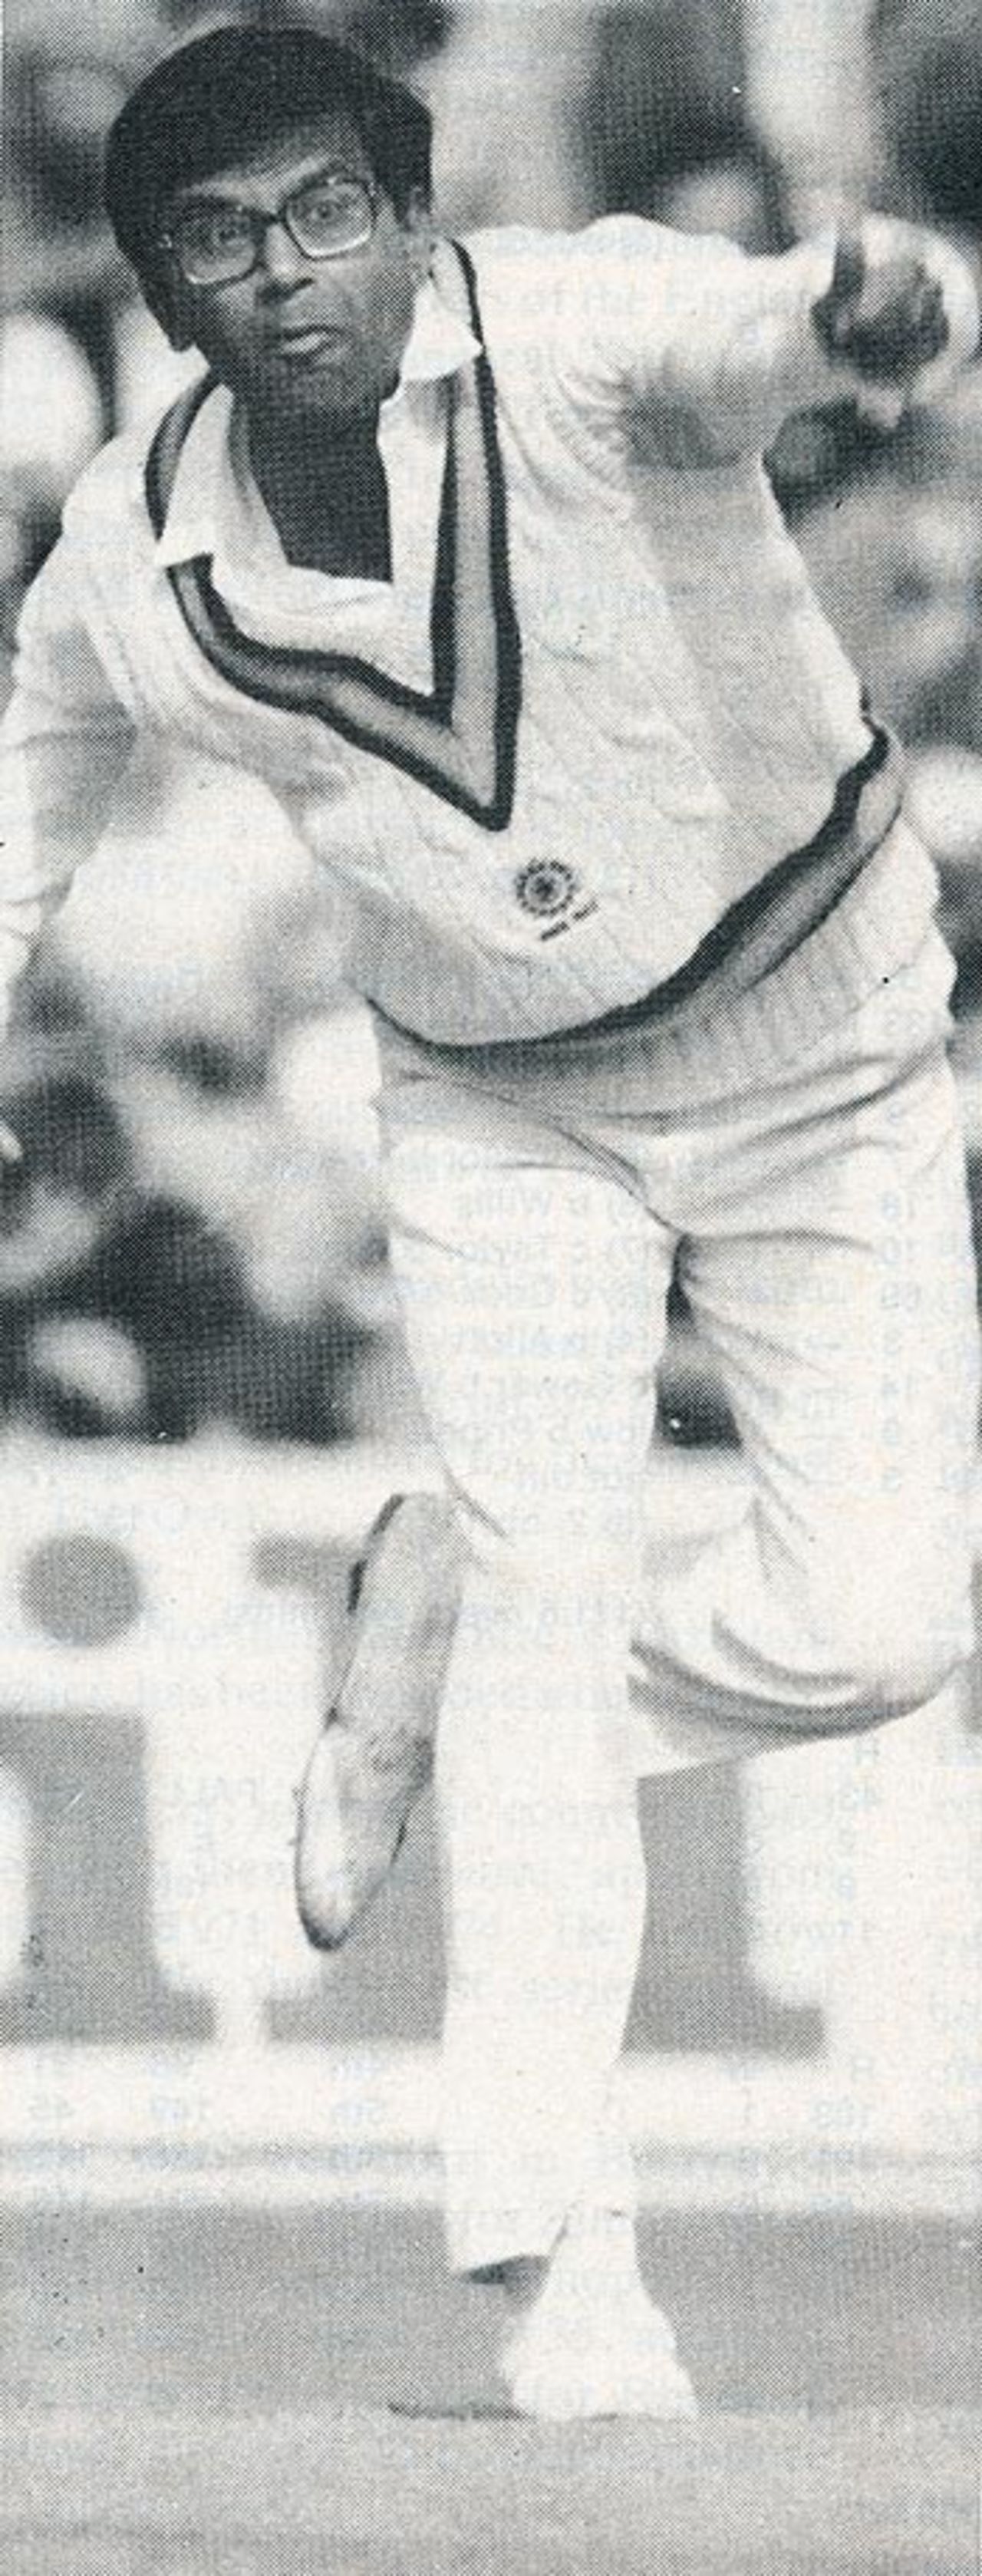 Dilip Doshi in action during the 1982 England tour